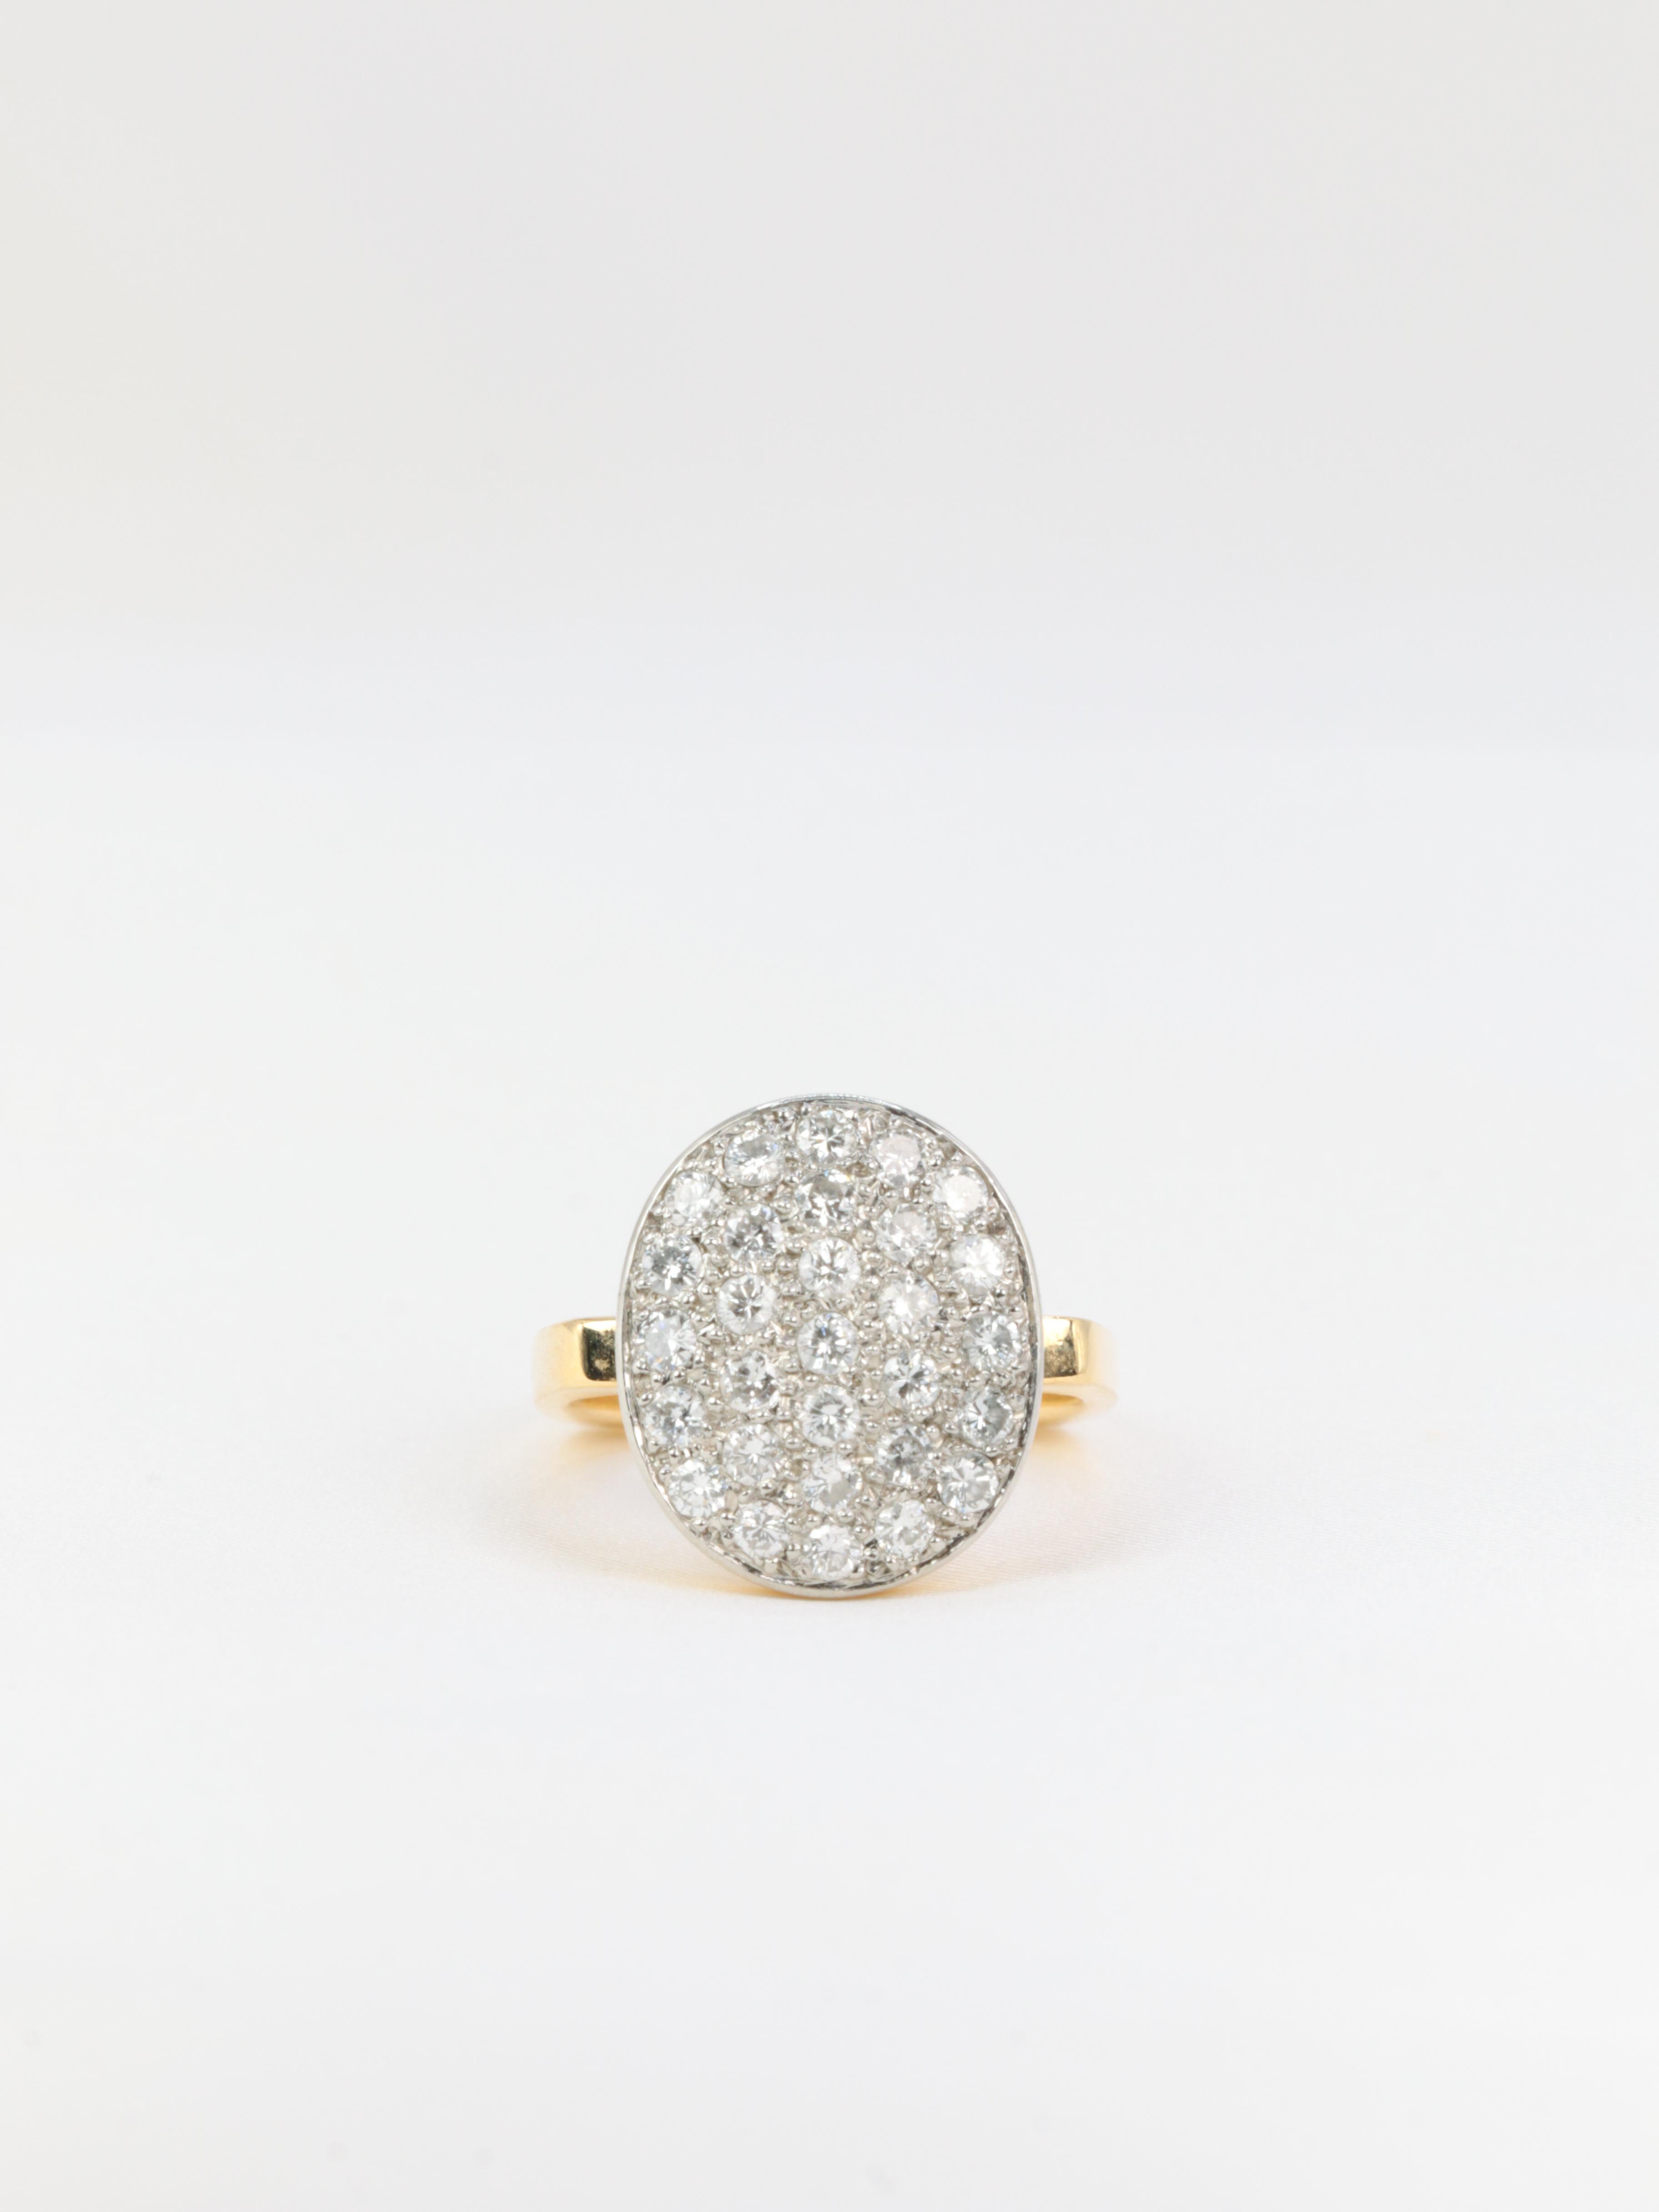 DINH VAN
18Kt (750°/°°) white and yellow gold Dinh Van vintage ring set with diamonds for a total weight of approximately 2ct.
The “impressions” collection has been marketed by Dinh Van since the 1970s. The square ring and the Dinh Van style clearly